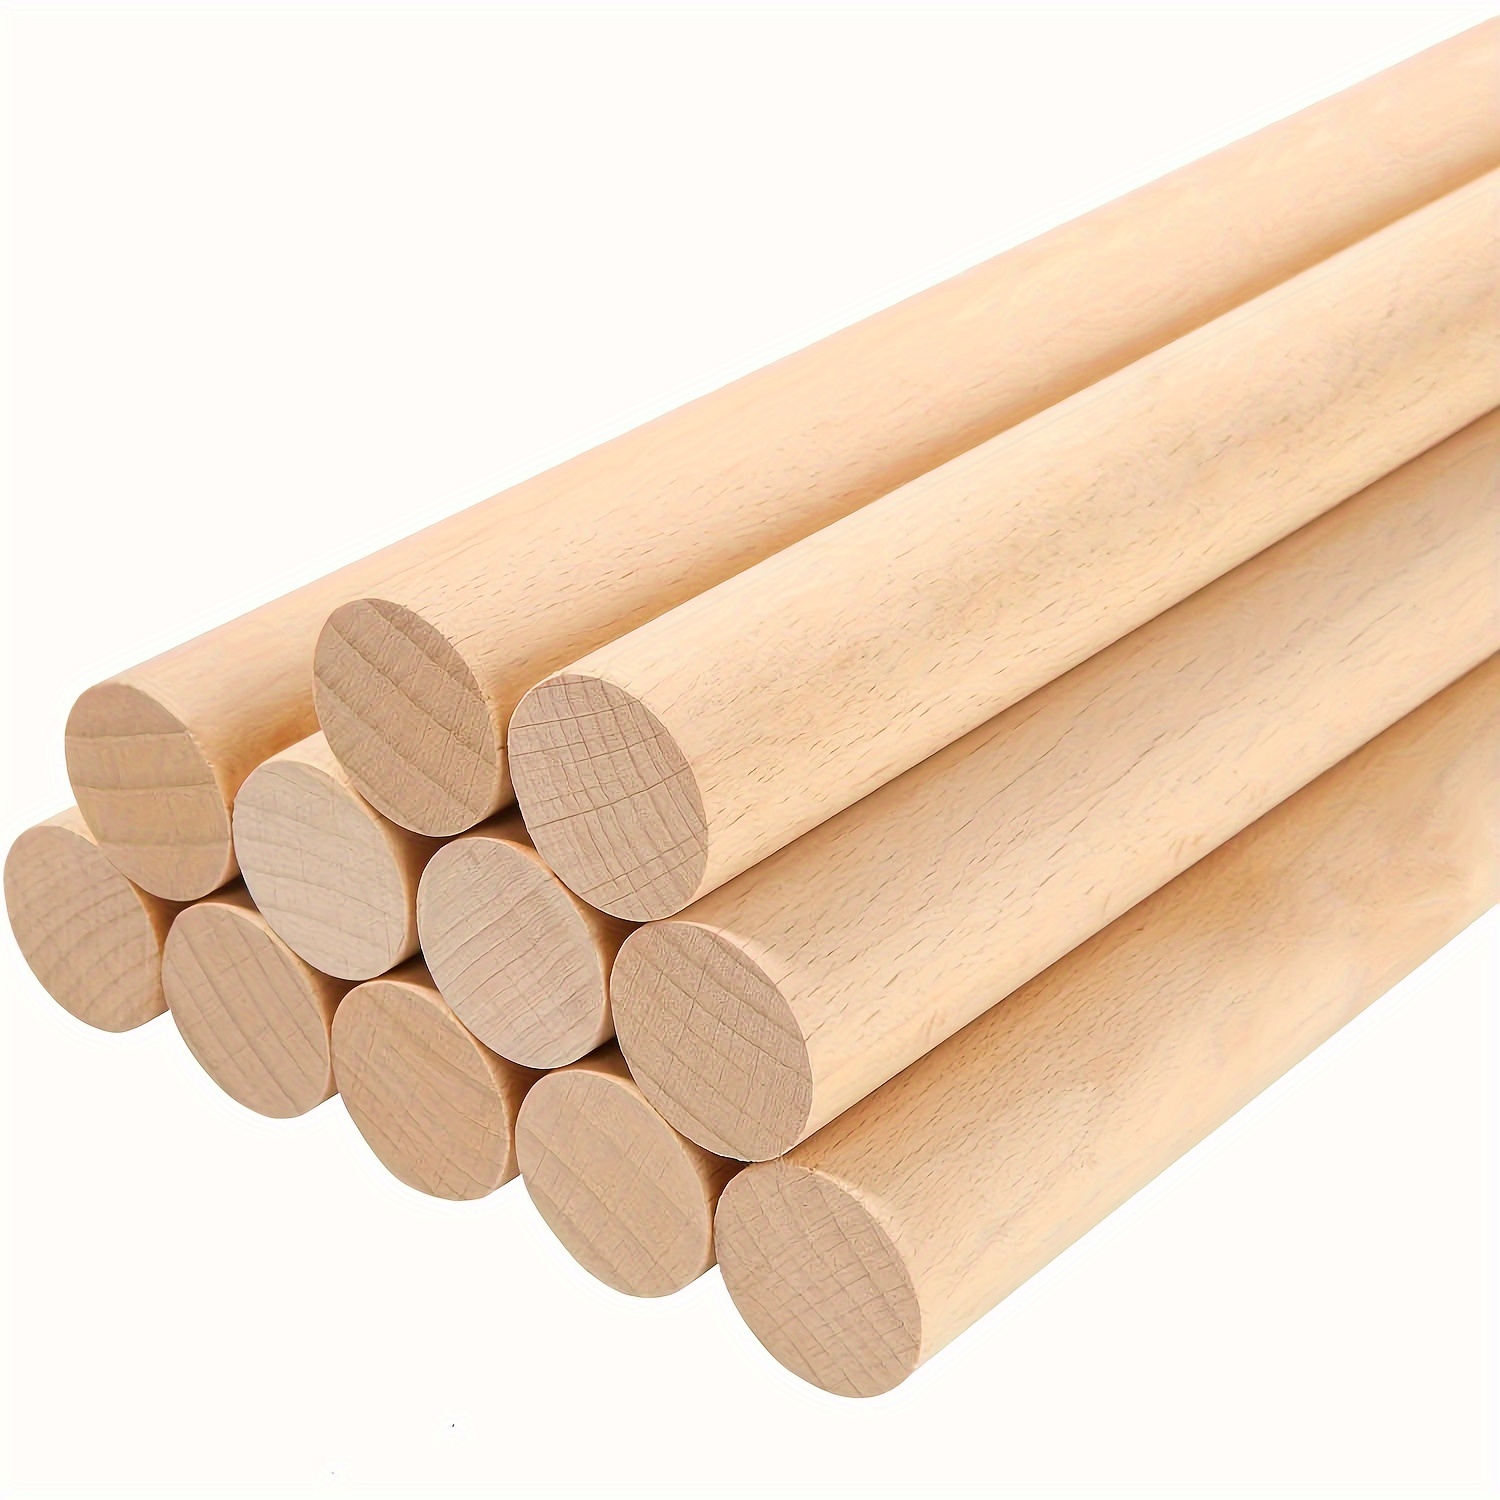 Wood Square Dowel Rods 1 inch x 12 Pack of 25 Wooden Craft Sticks for  Crafts and Woodworking by Woodpeckers 